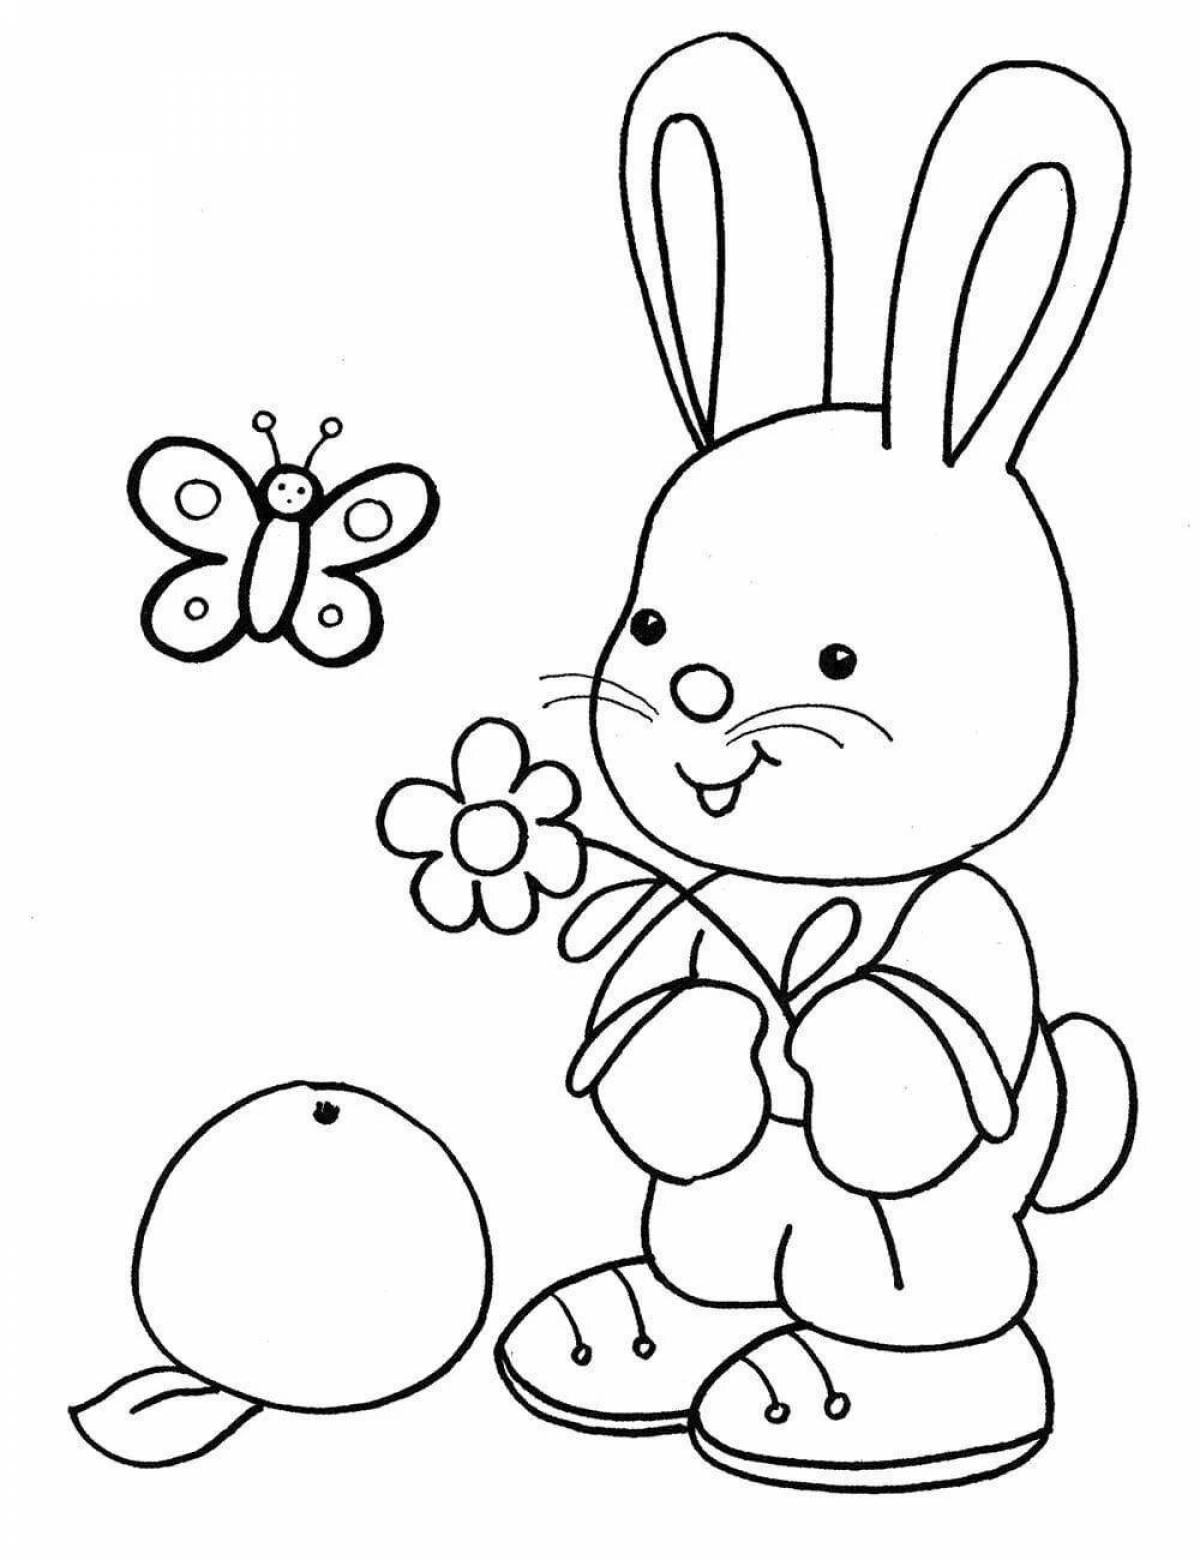 Fancy coloring book for girls 4-5 years old